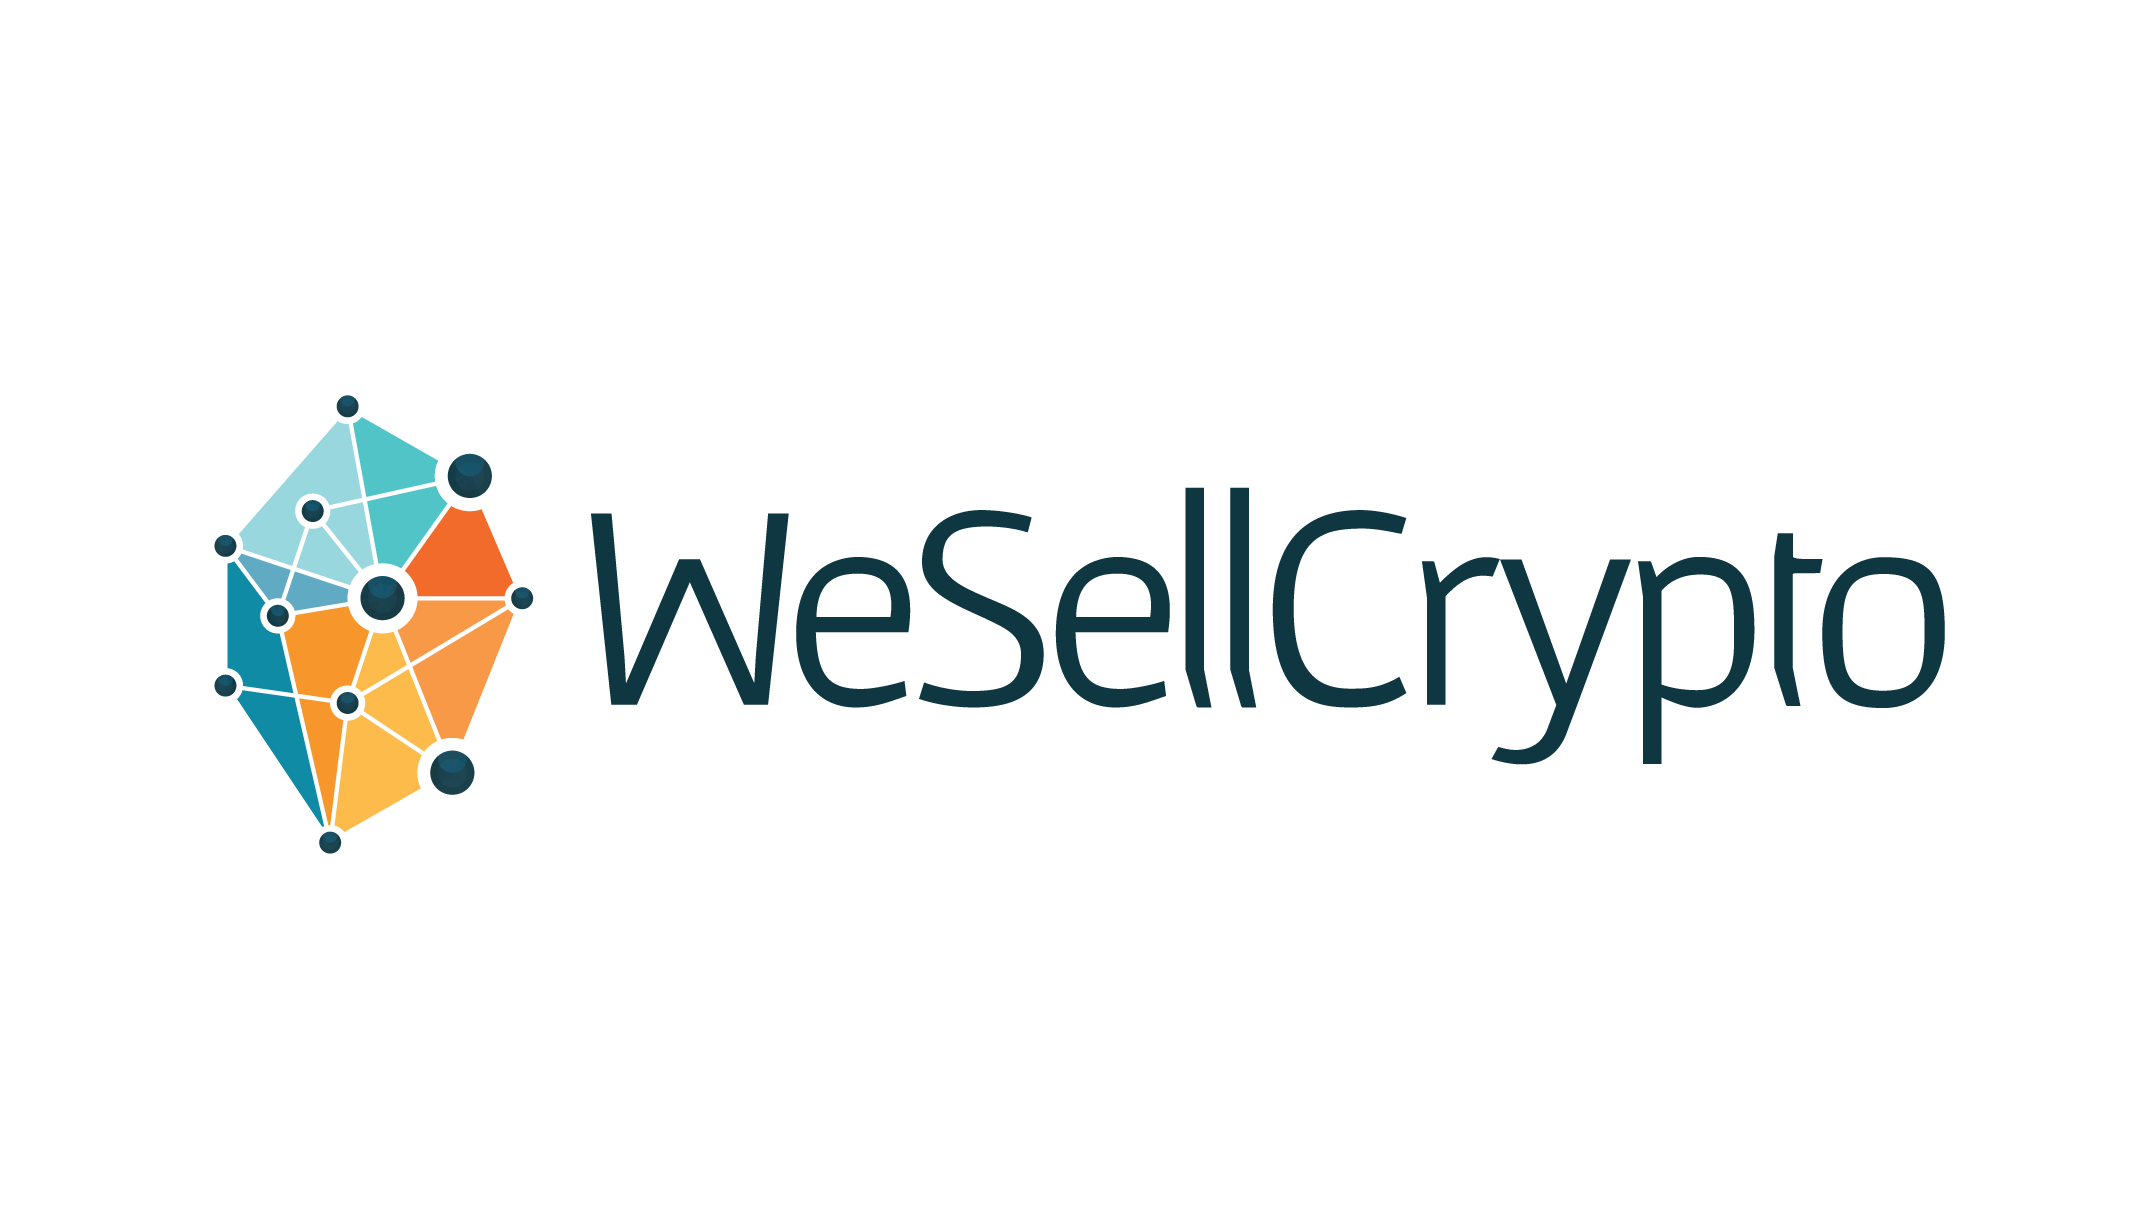 Learn more about its services. Source: Wesellcrypto.